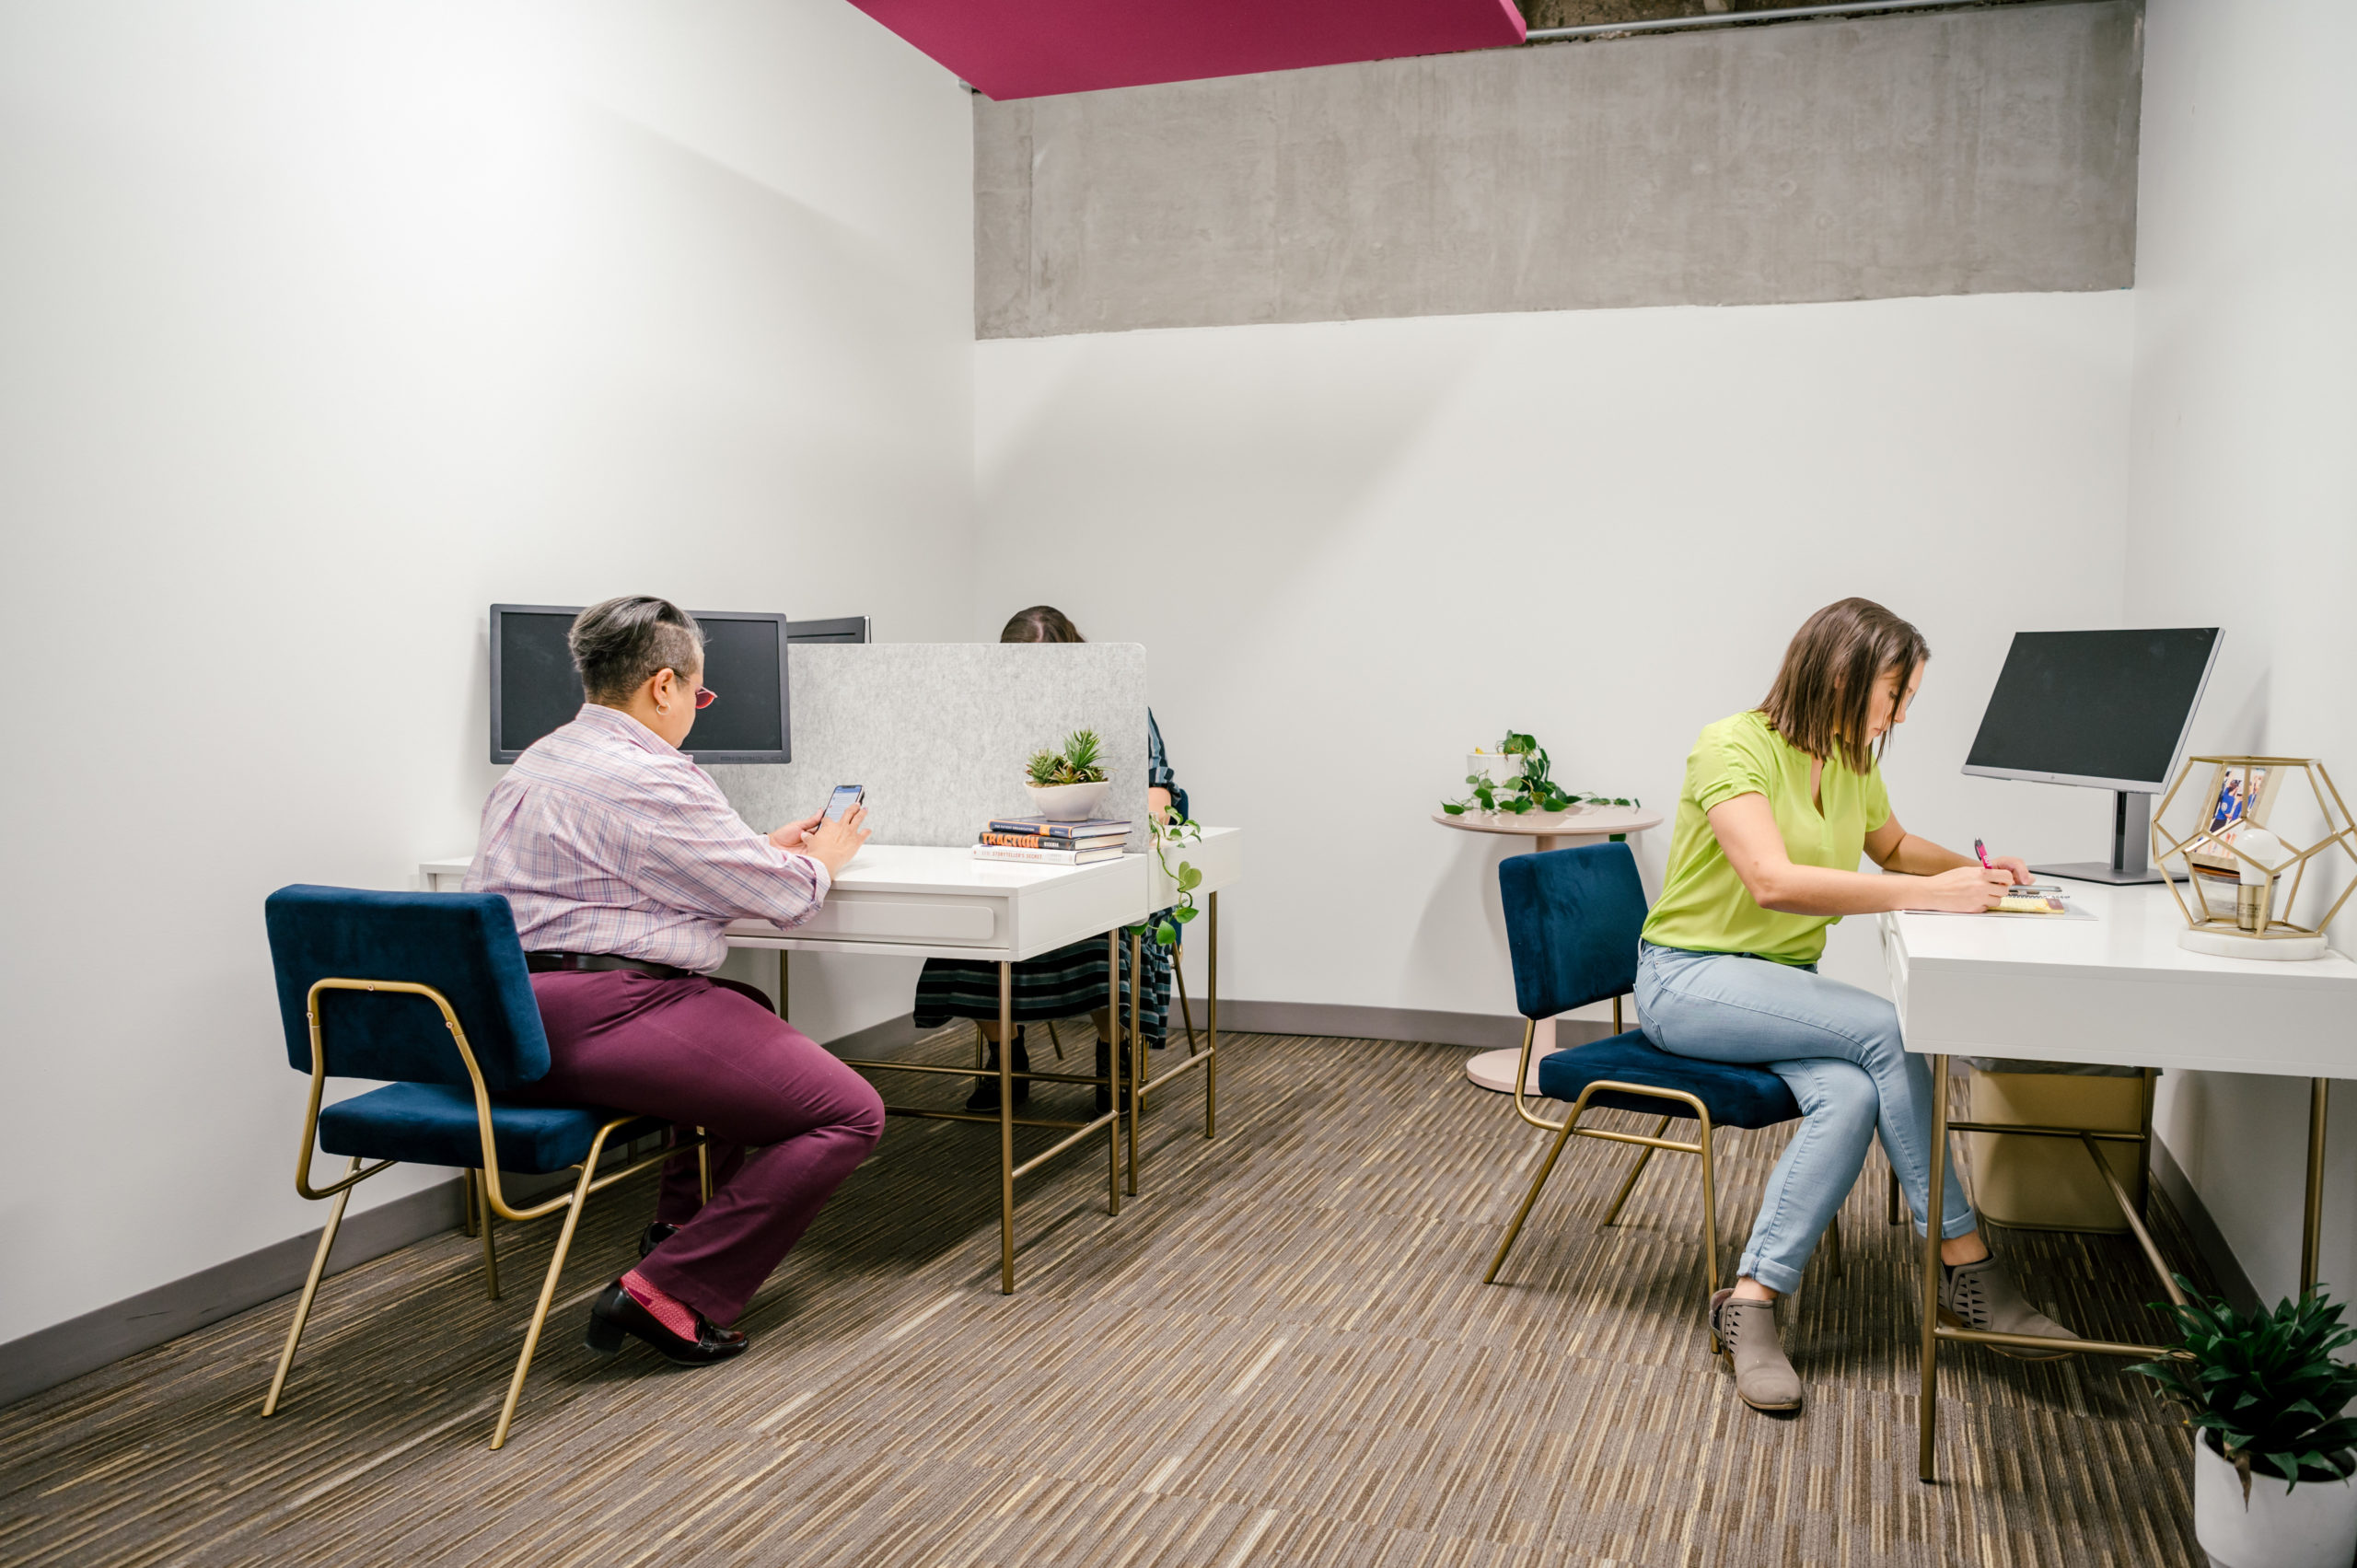 Photo of office community workspace with women sitting at desks working